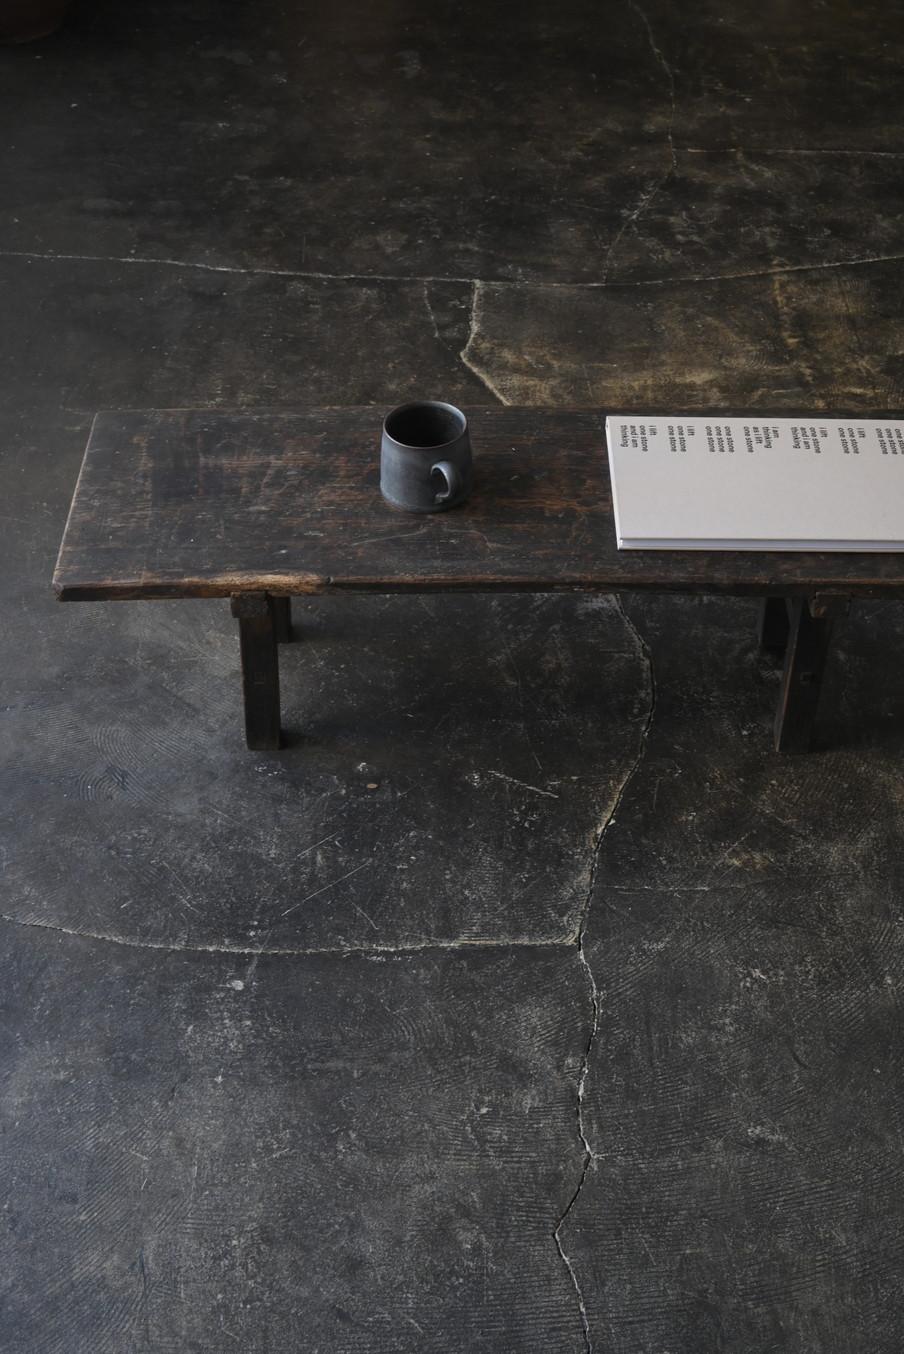 This is an antique wooden low table that was used in rural areas and shops in Japan.
In Japanese, this is called 